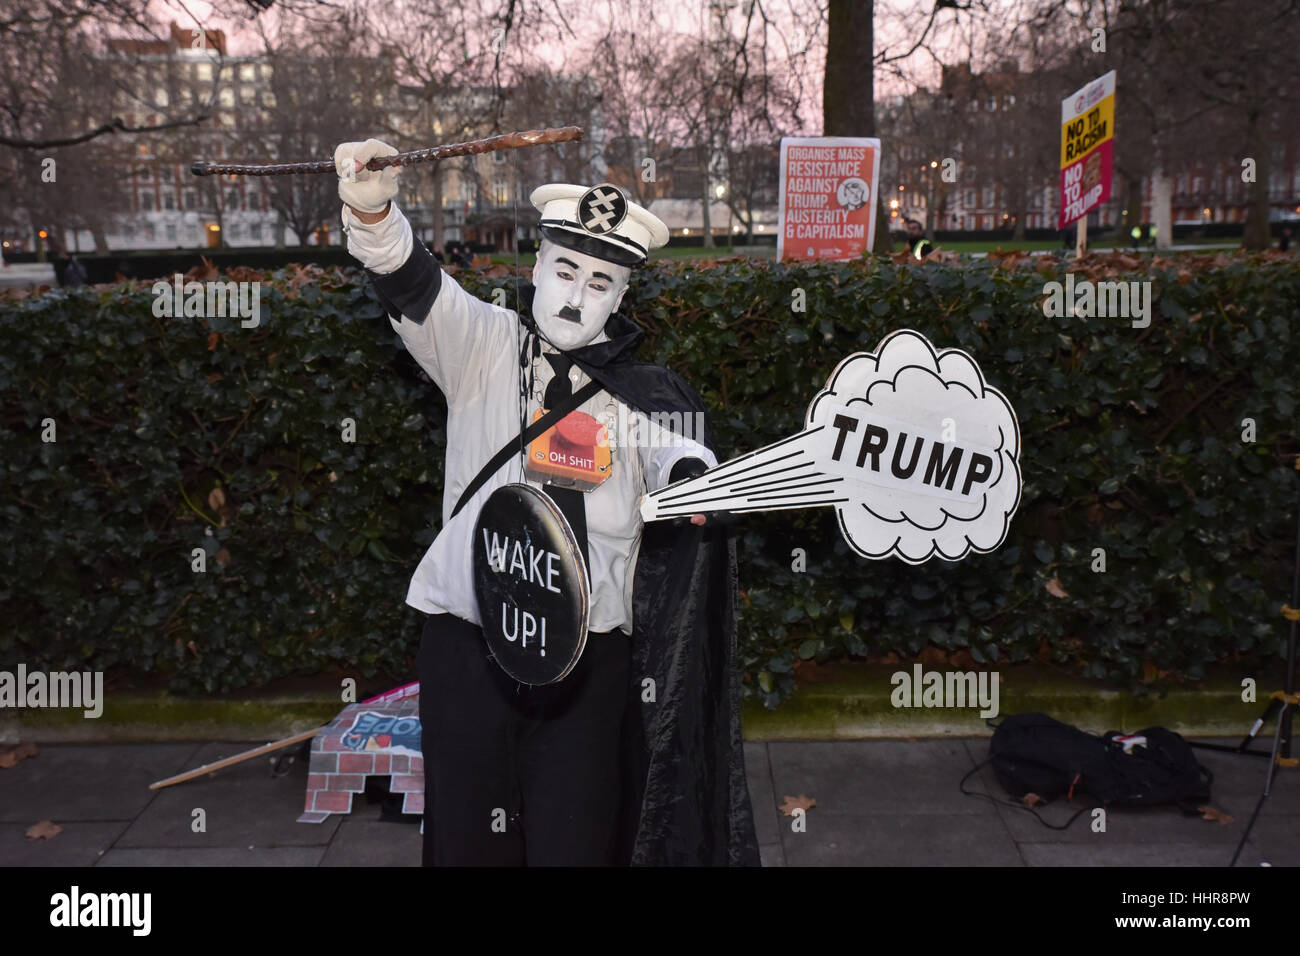 Grosvenor Square, London, UK. 20th Jan, 2017. Protesters outside the American Embassy against Donald Trump. Credit: Matthew Chattle/Alamy Live News Stock Photo